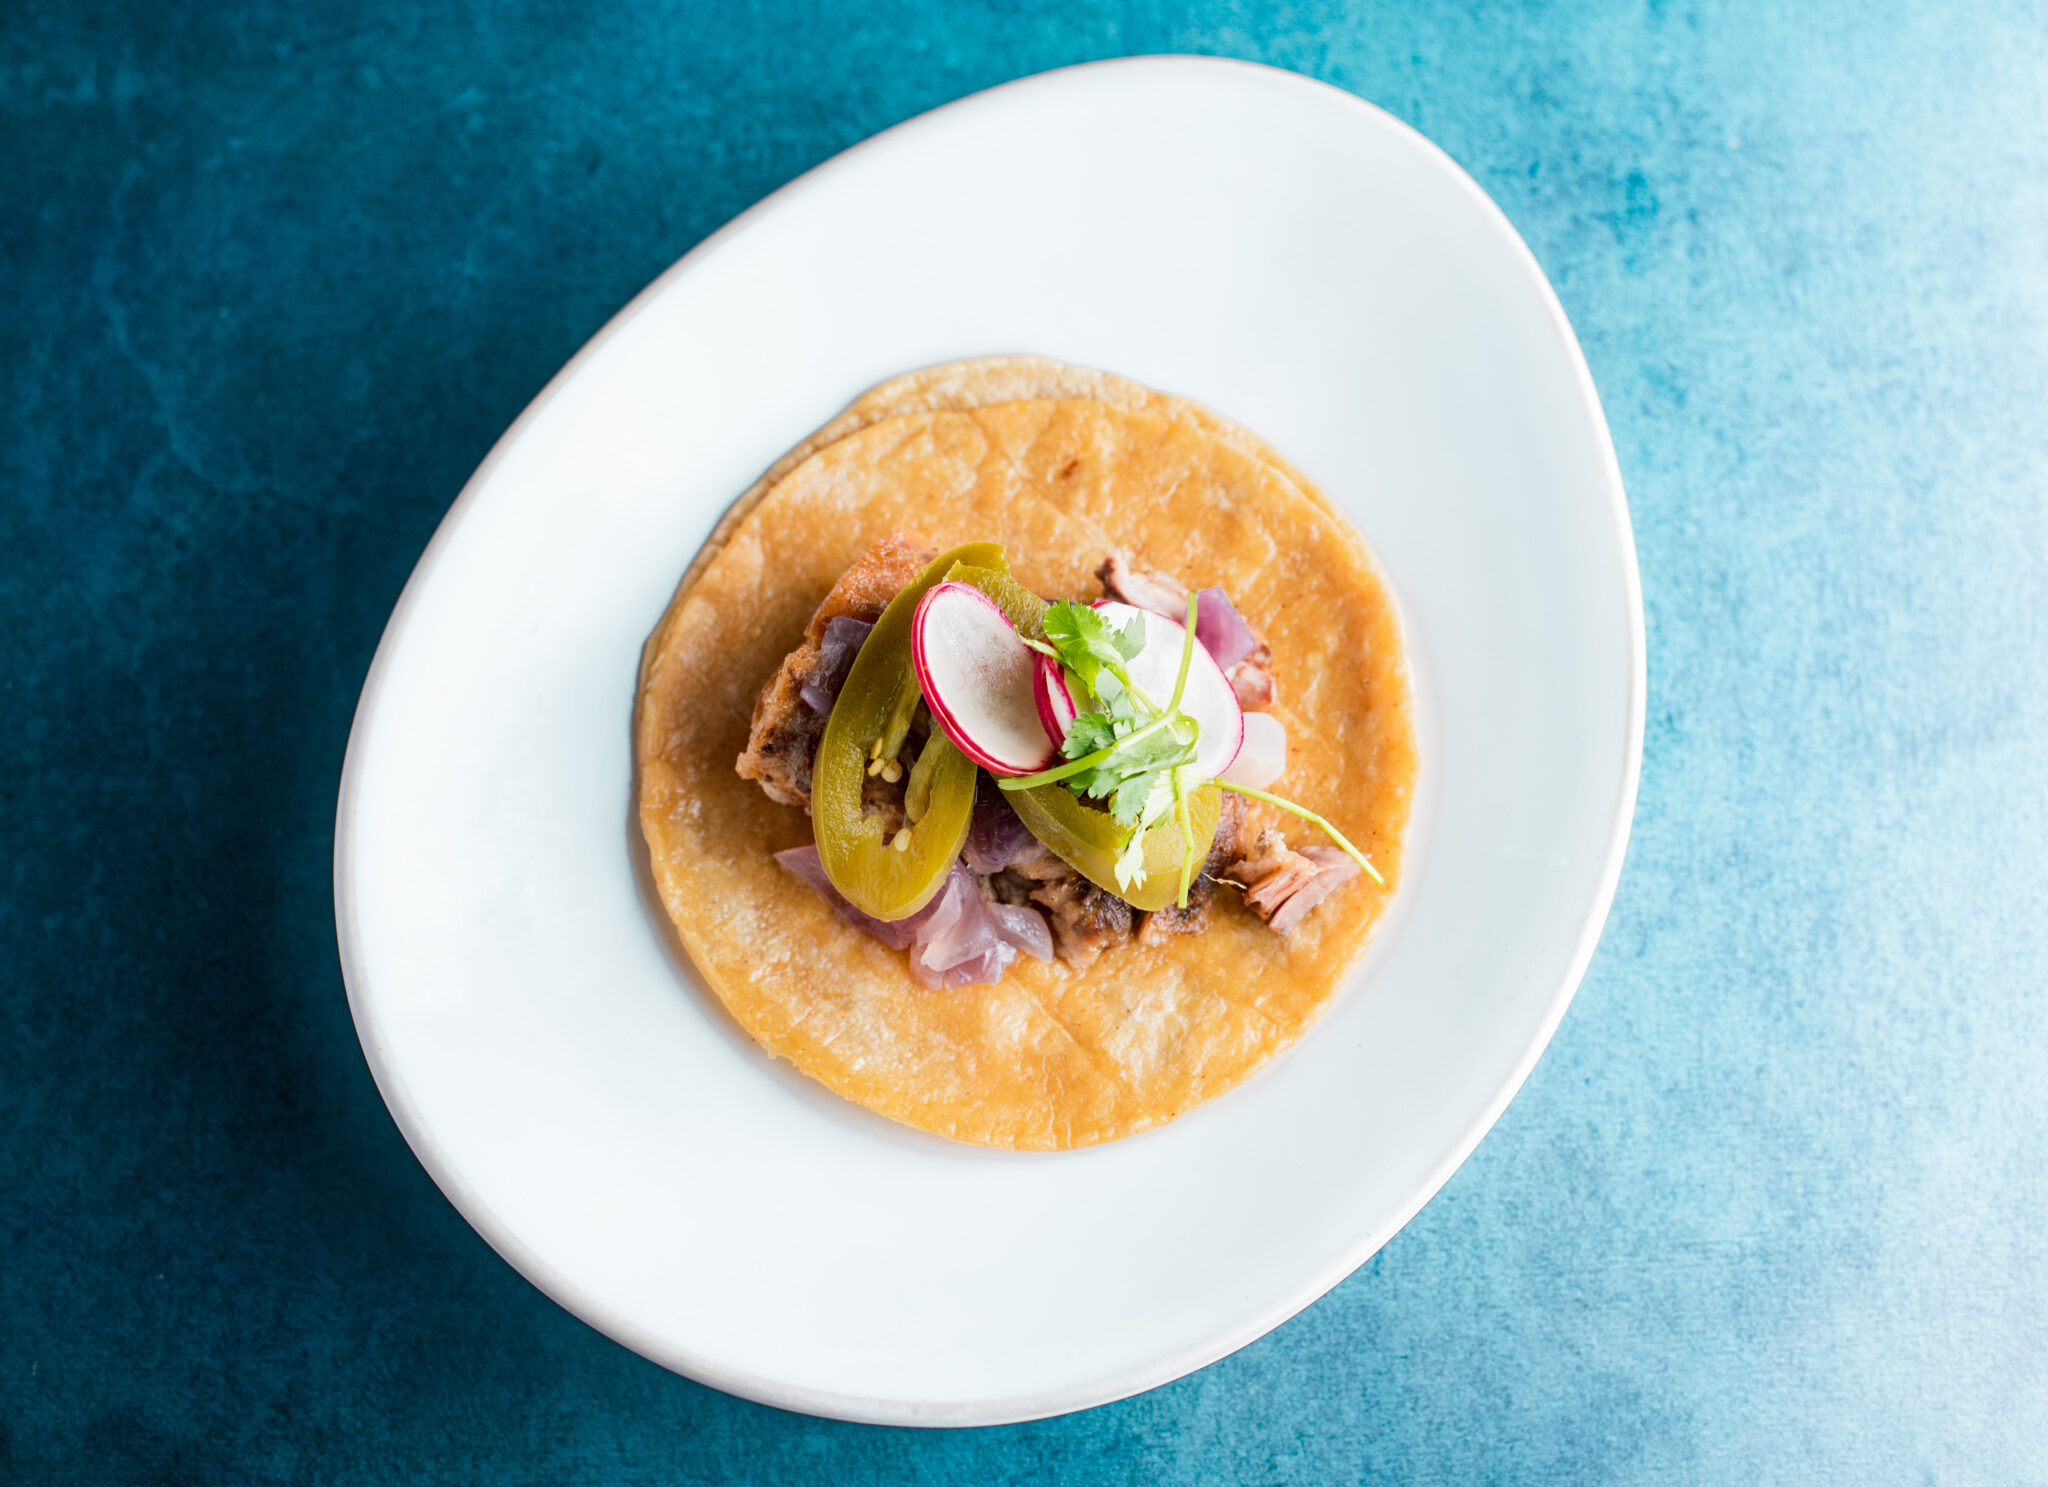 taco artfully placed on a decorative plate and a blue background